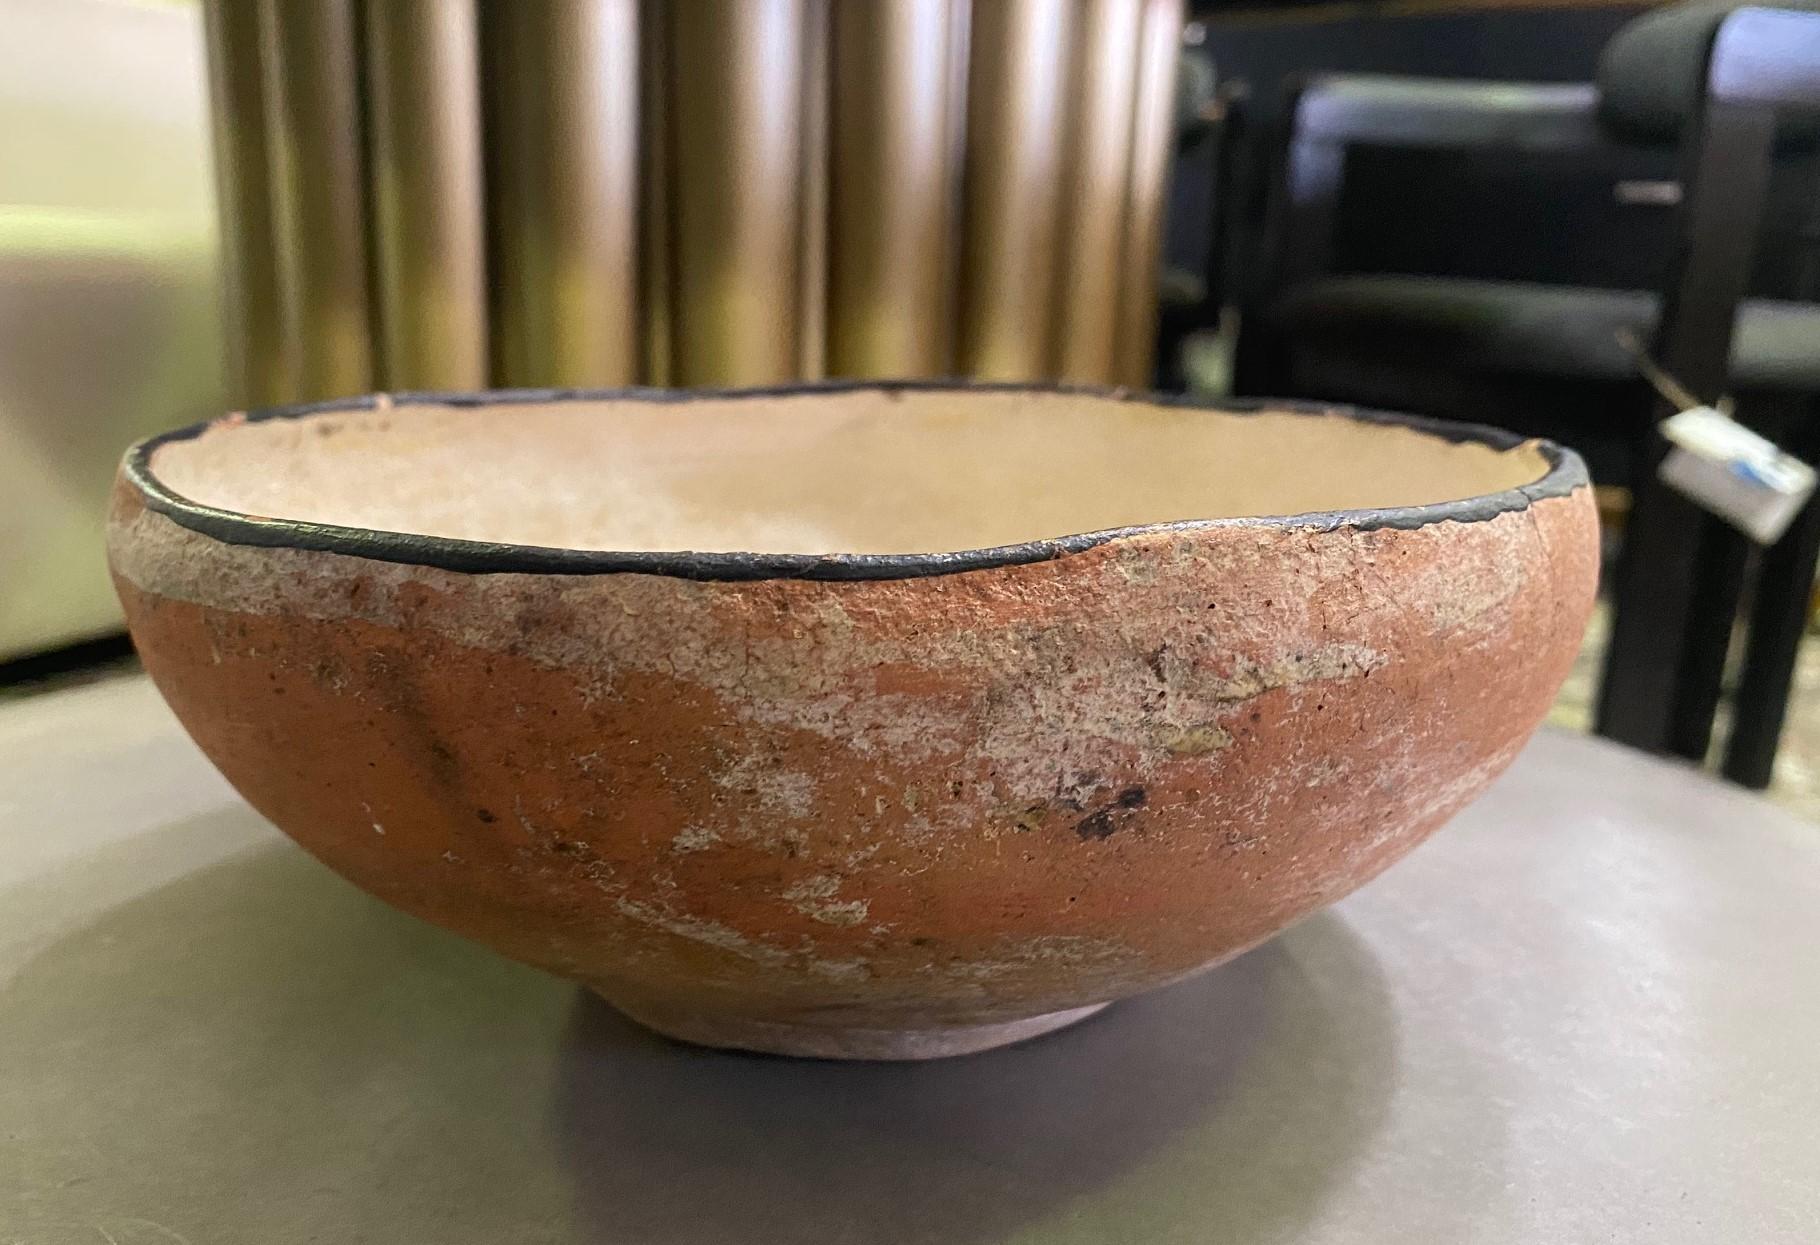 An interesting piece. Perhaps Southwestern Pueblo Pottery. It came from a collection of other Native American objects - pottery, rugs, blankets, etc...

The bowl is well made, wonderfully colored, and textured, and clearly has some age to it. We